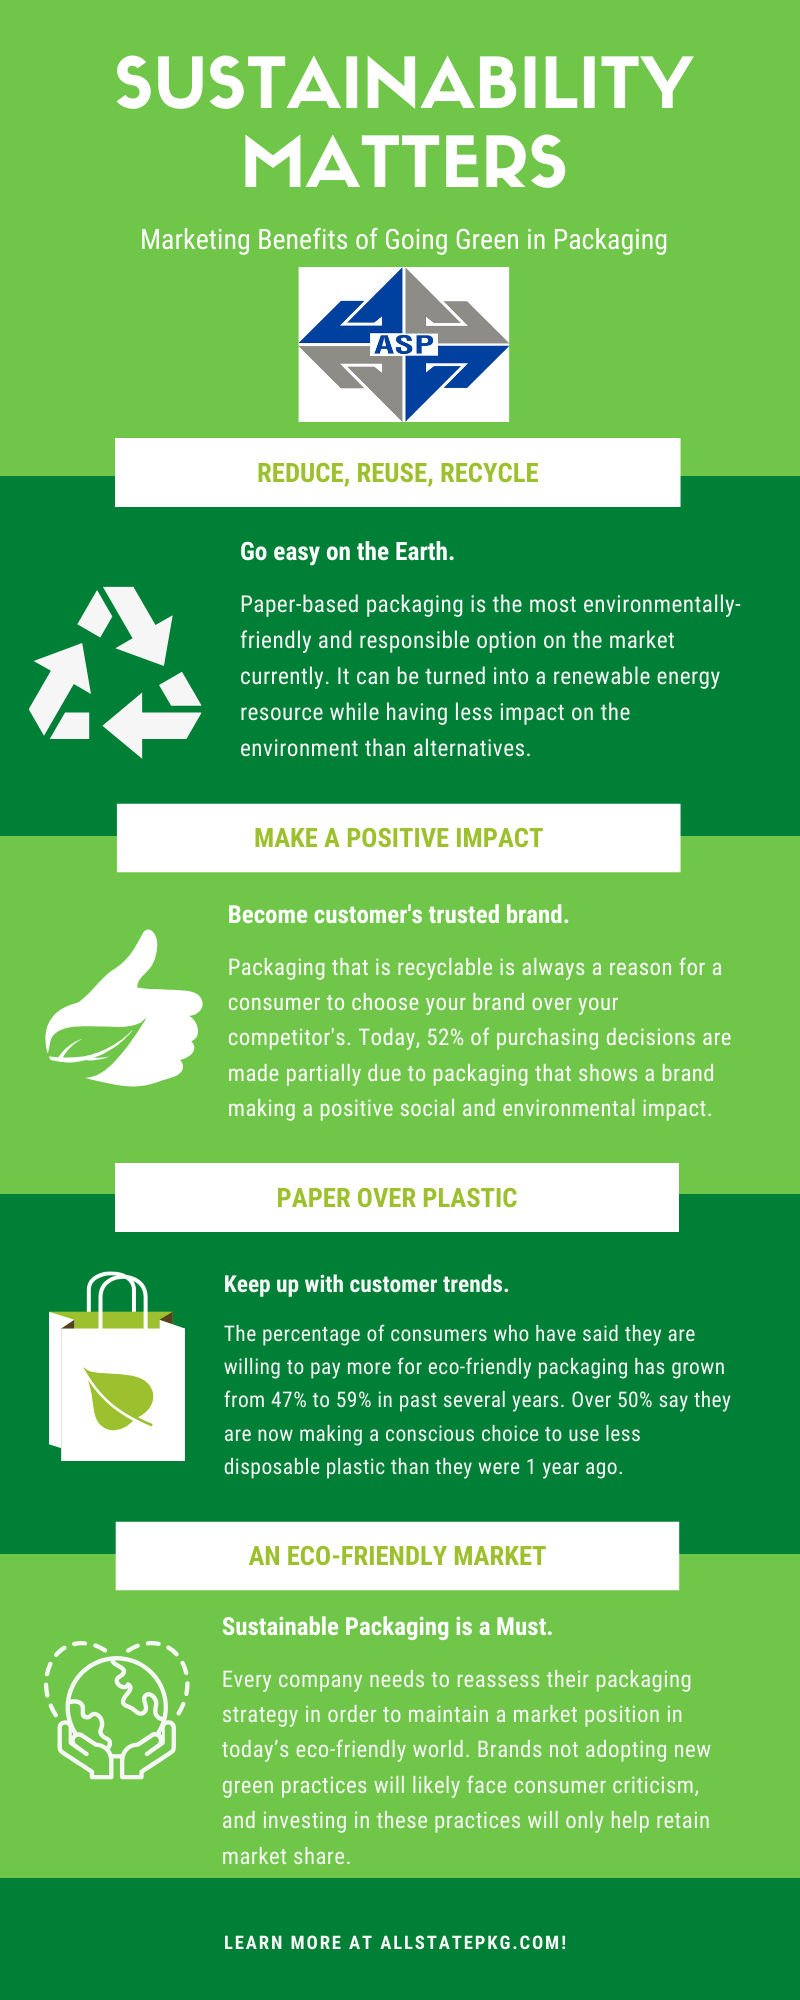 Green Sustainable & Eco-friendly Packaging Supplier